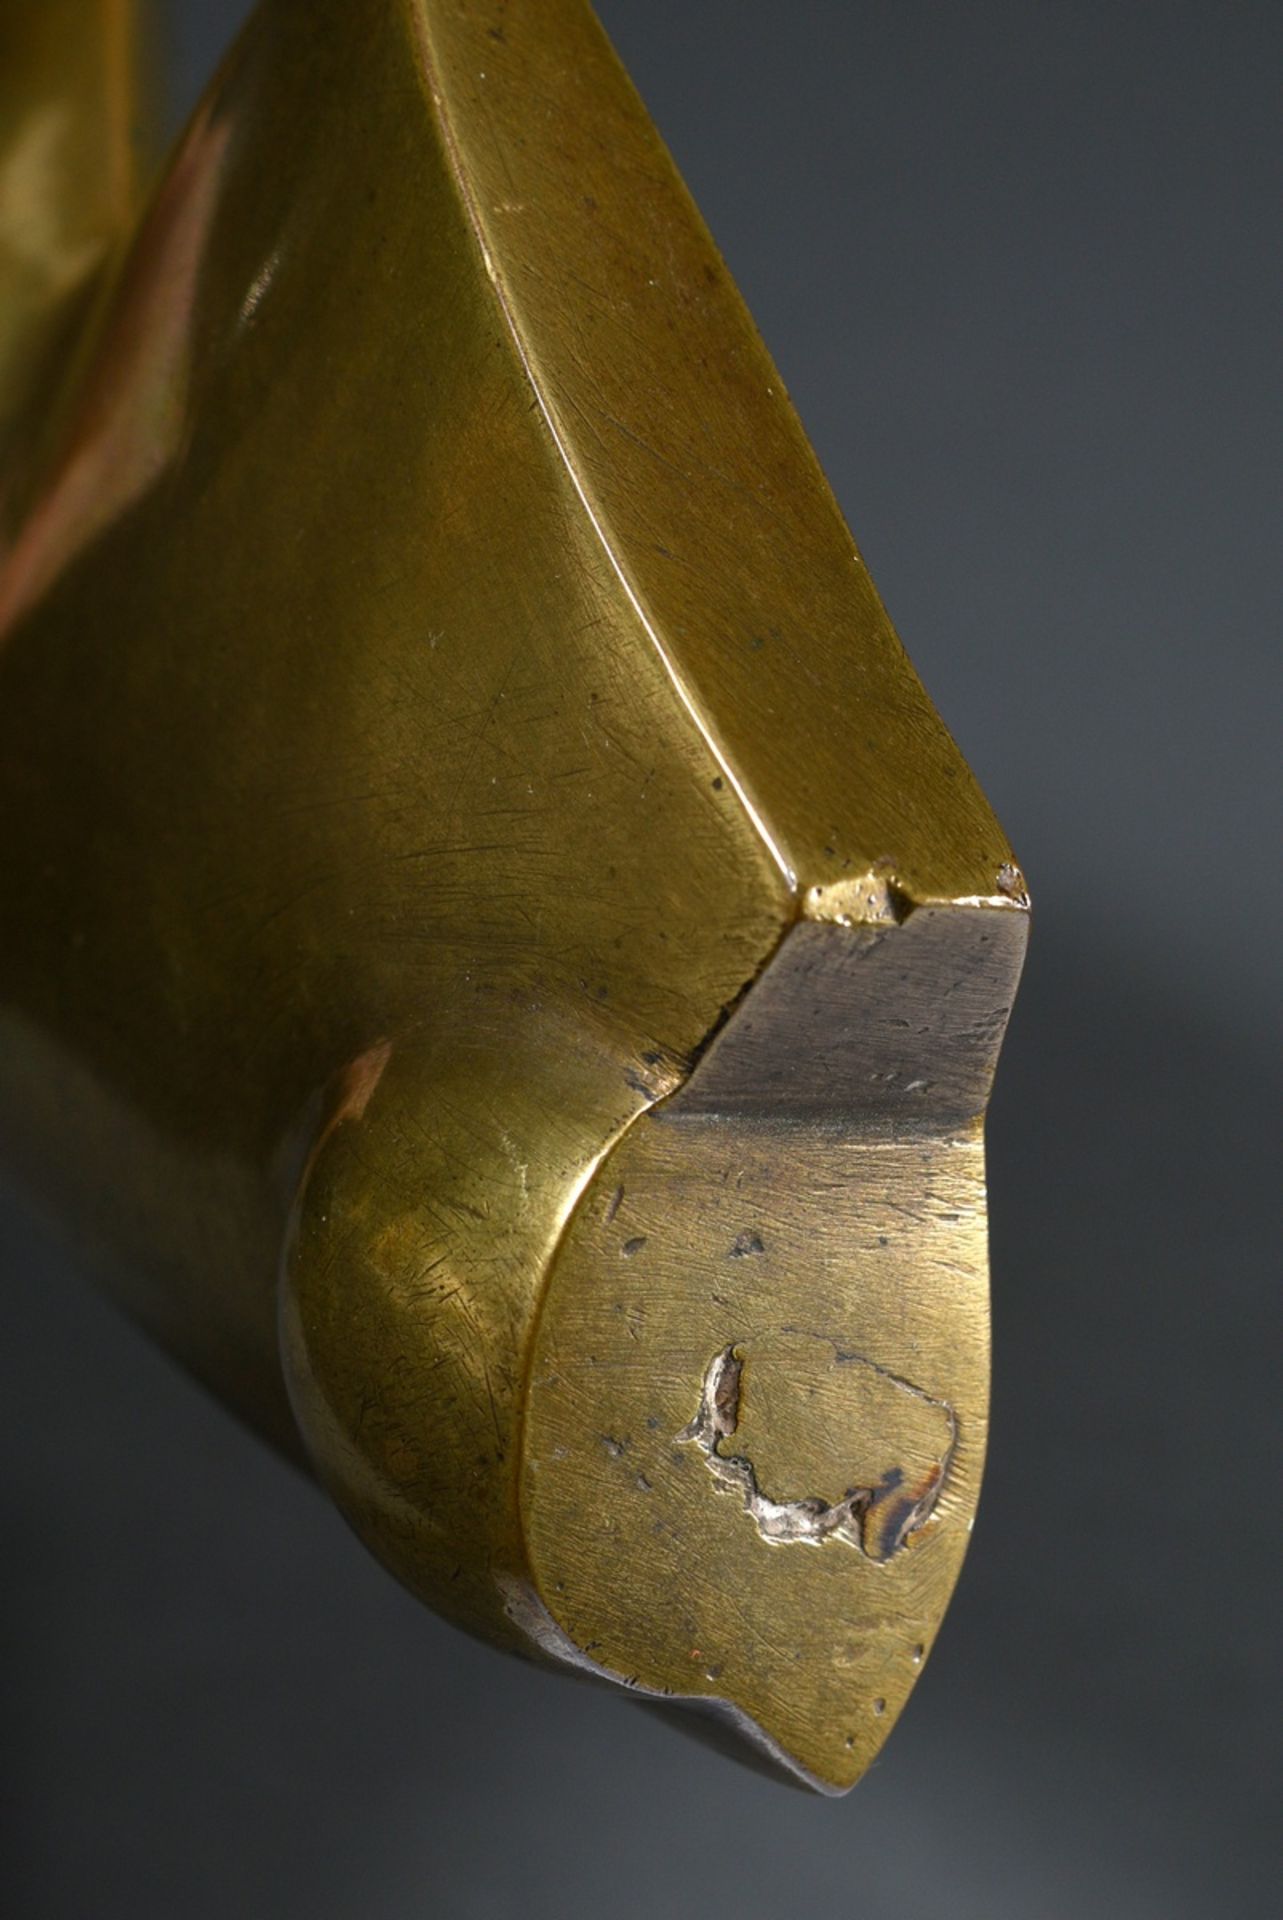 Archipenko, Alexander (1887-1964) "Flat Torso" 1914, early life cast around 1920, bronze with gold- - Image 11 of 17